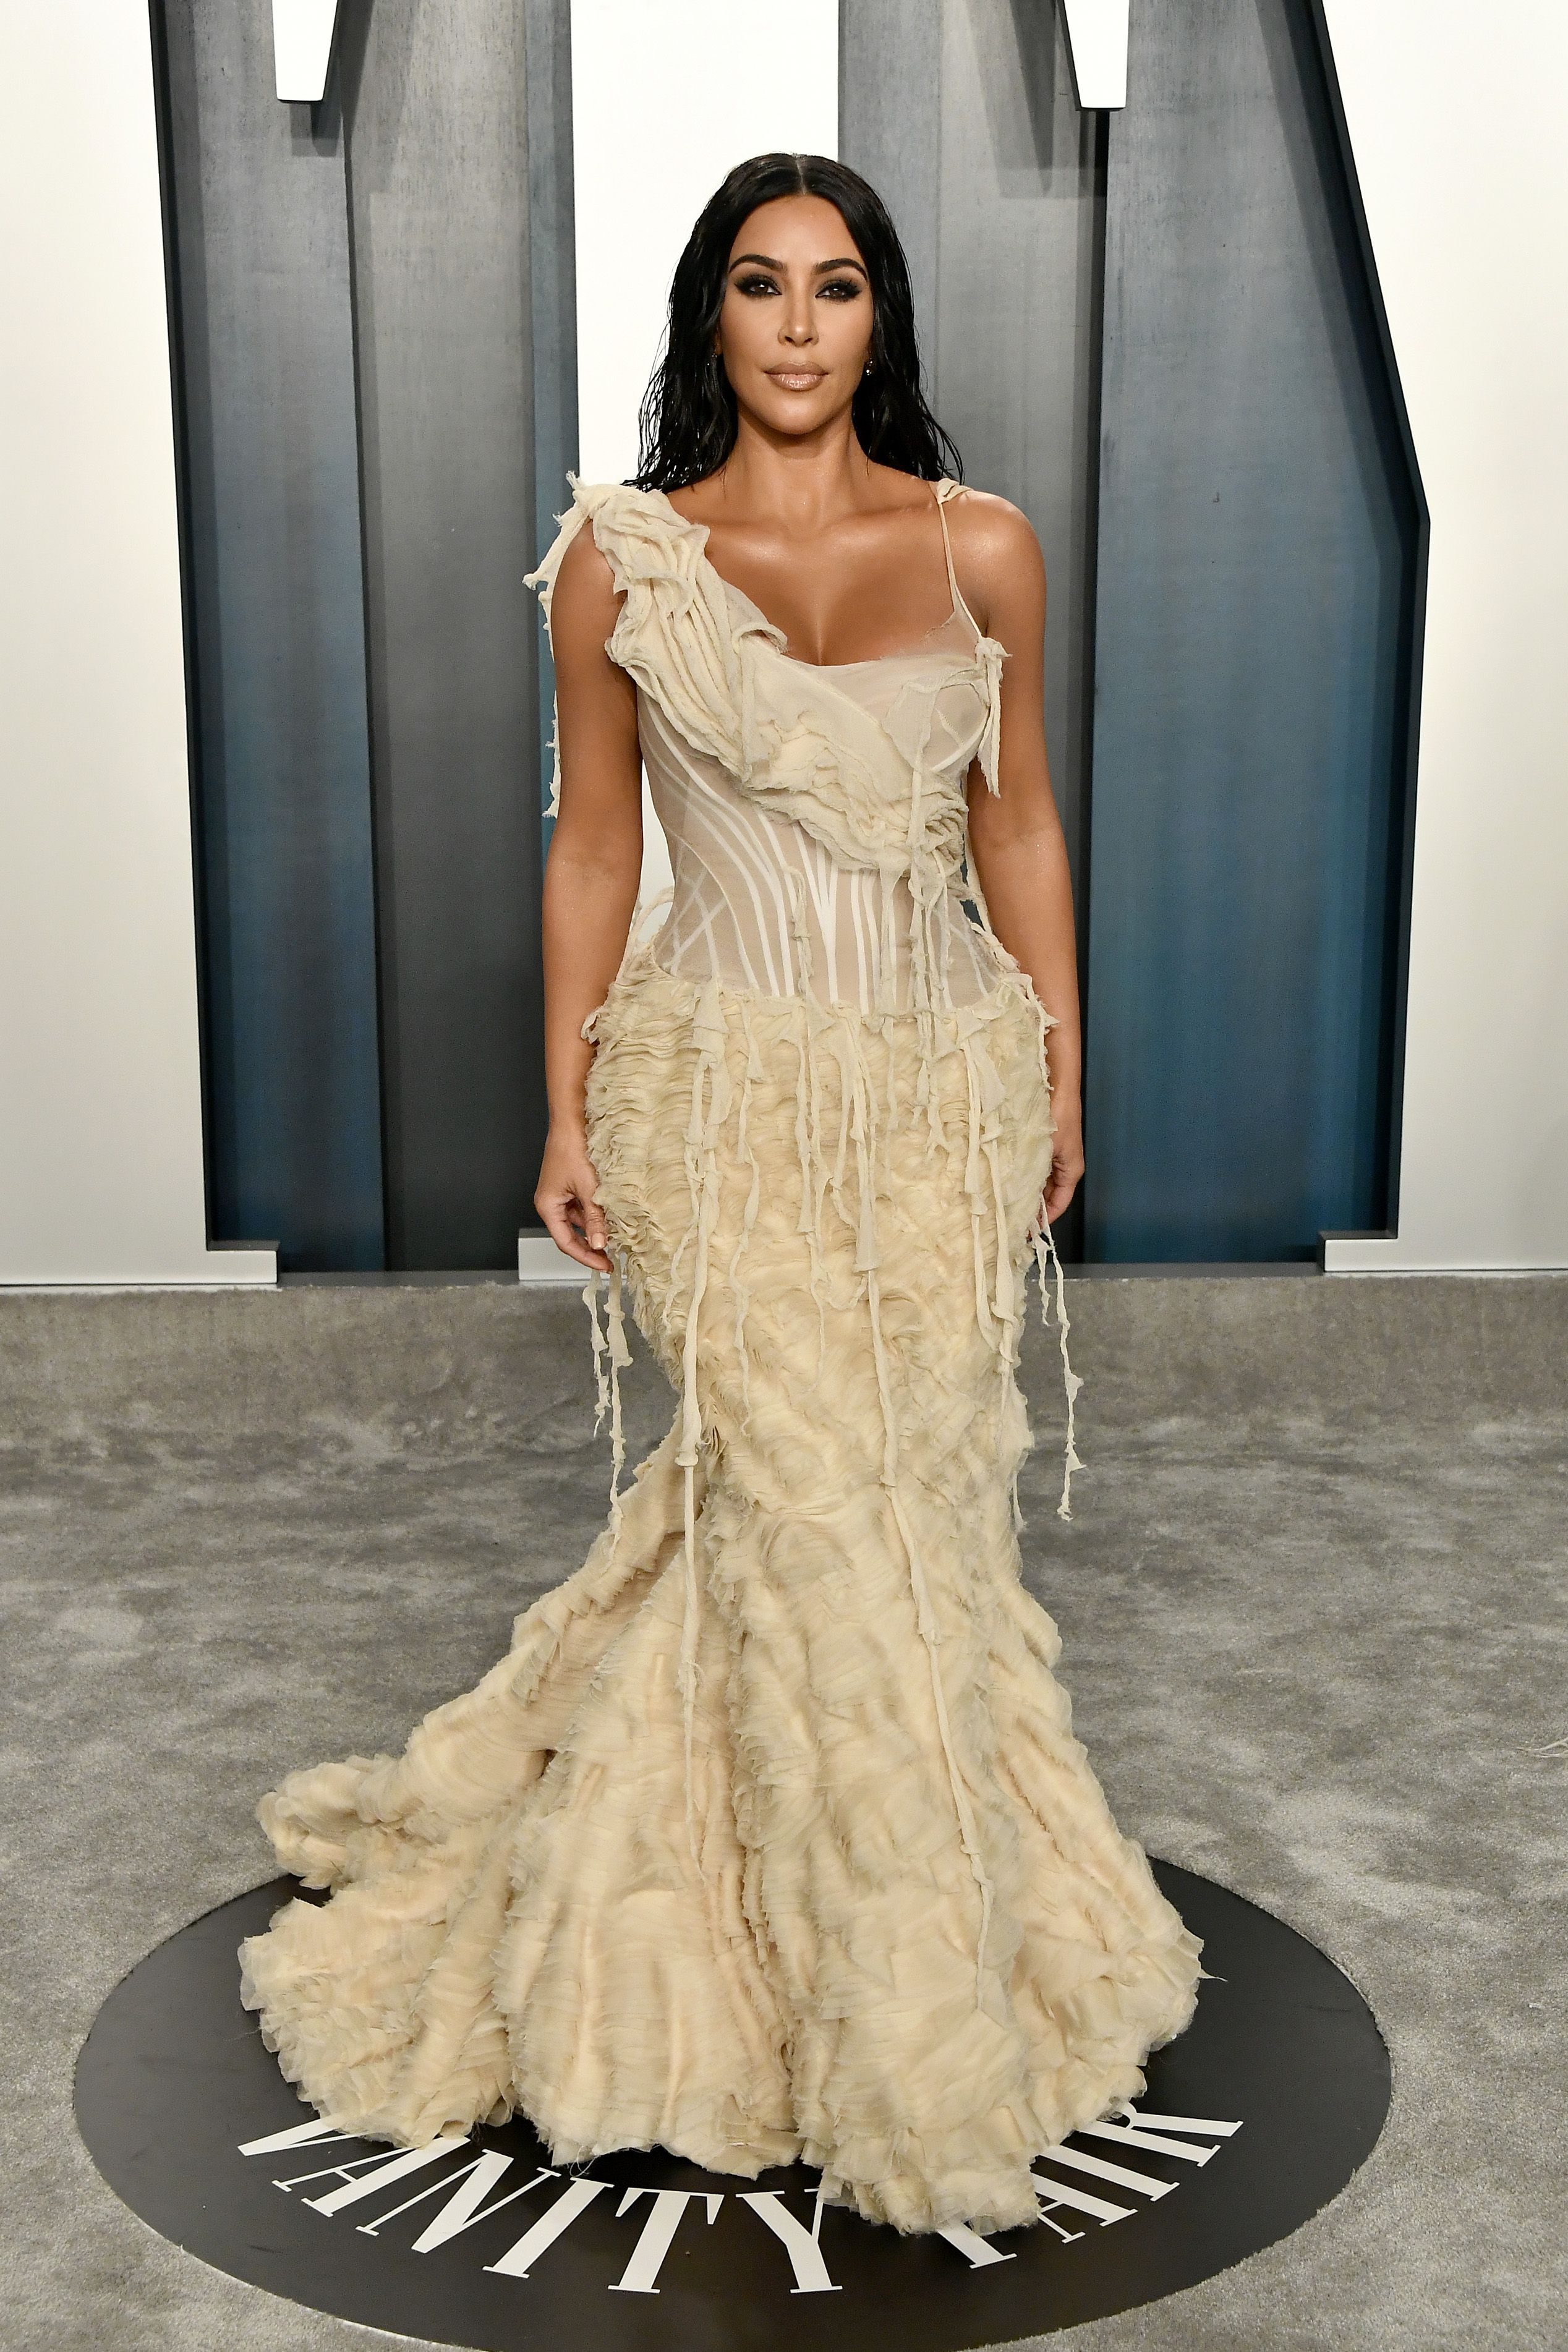 The historical significance of Kardashian West's vintage Alexander McQueen dress